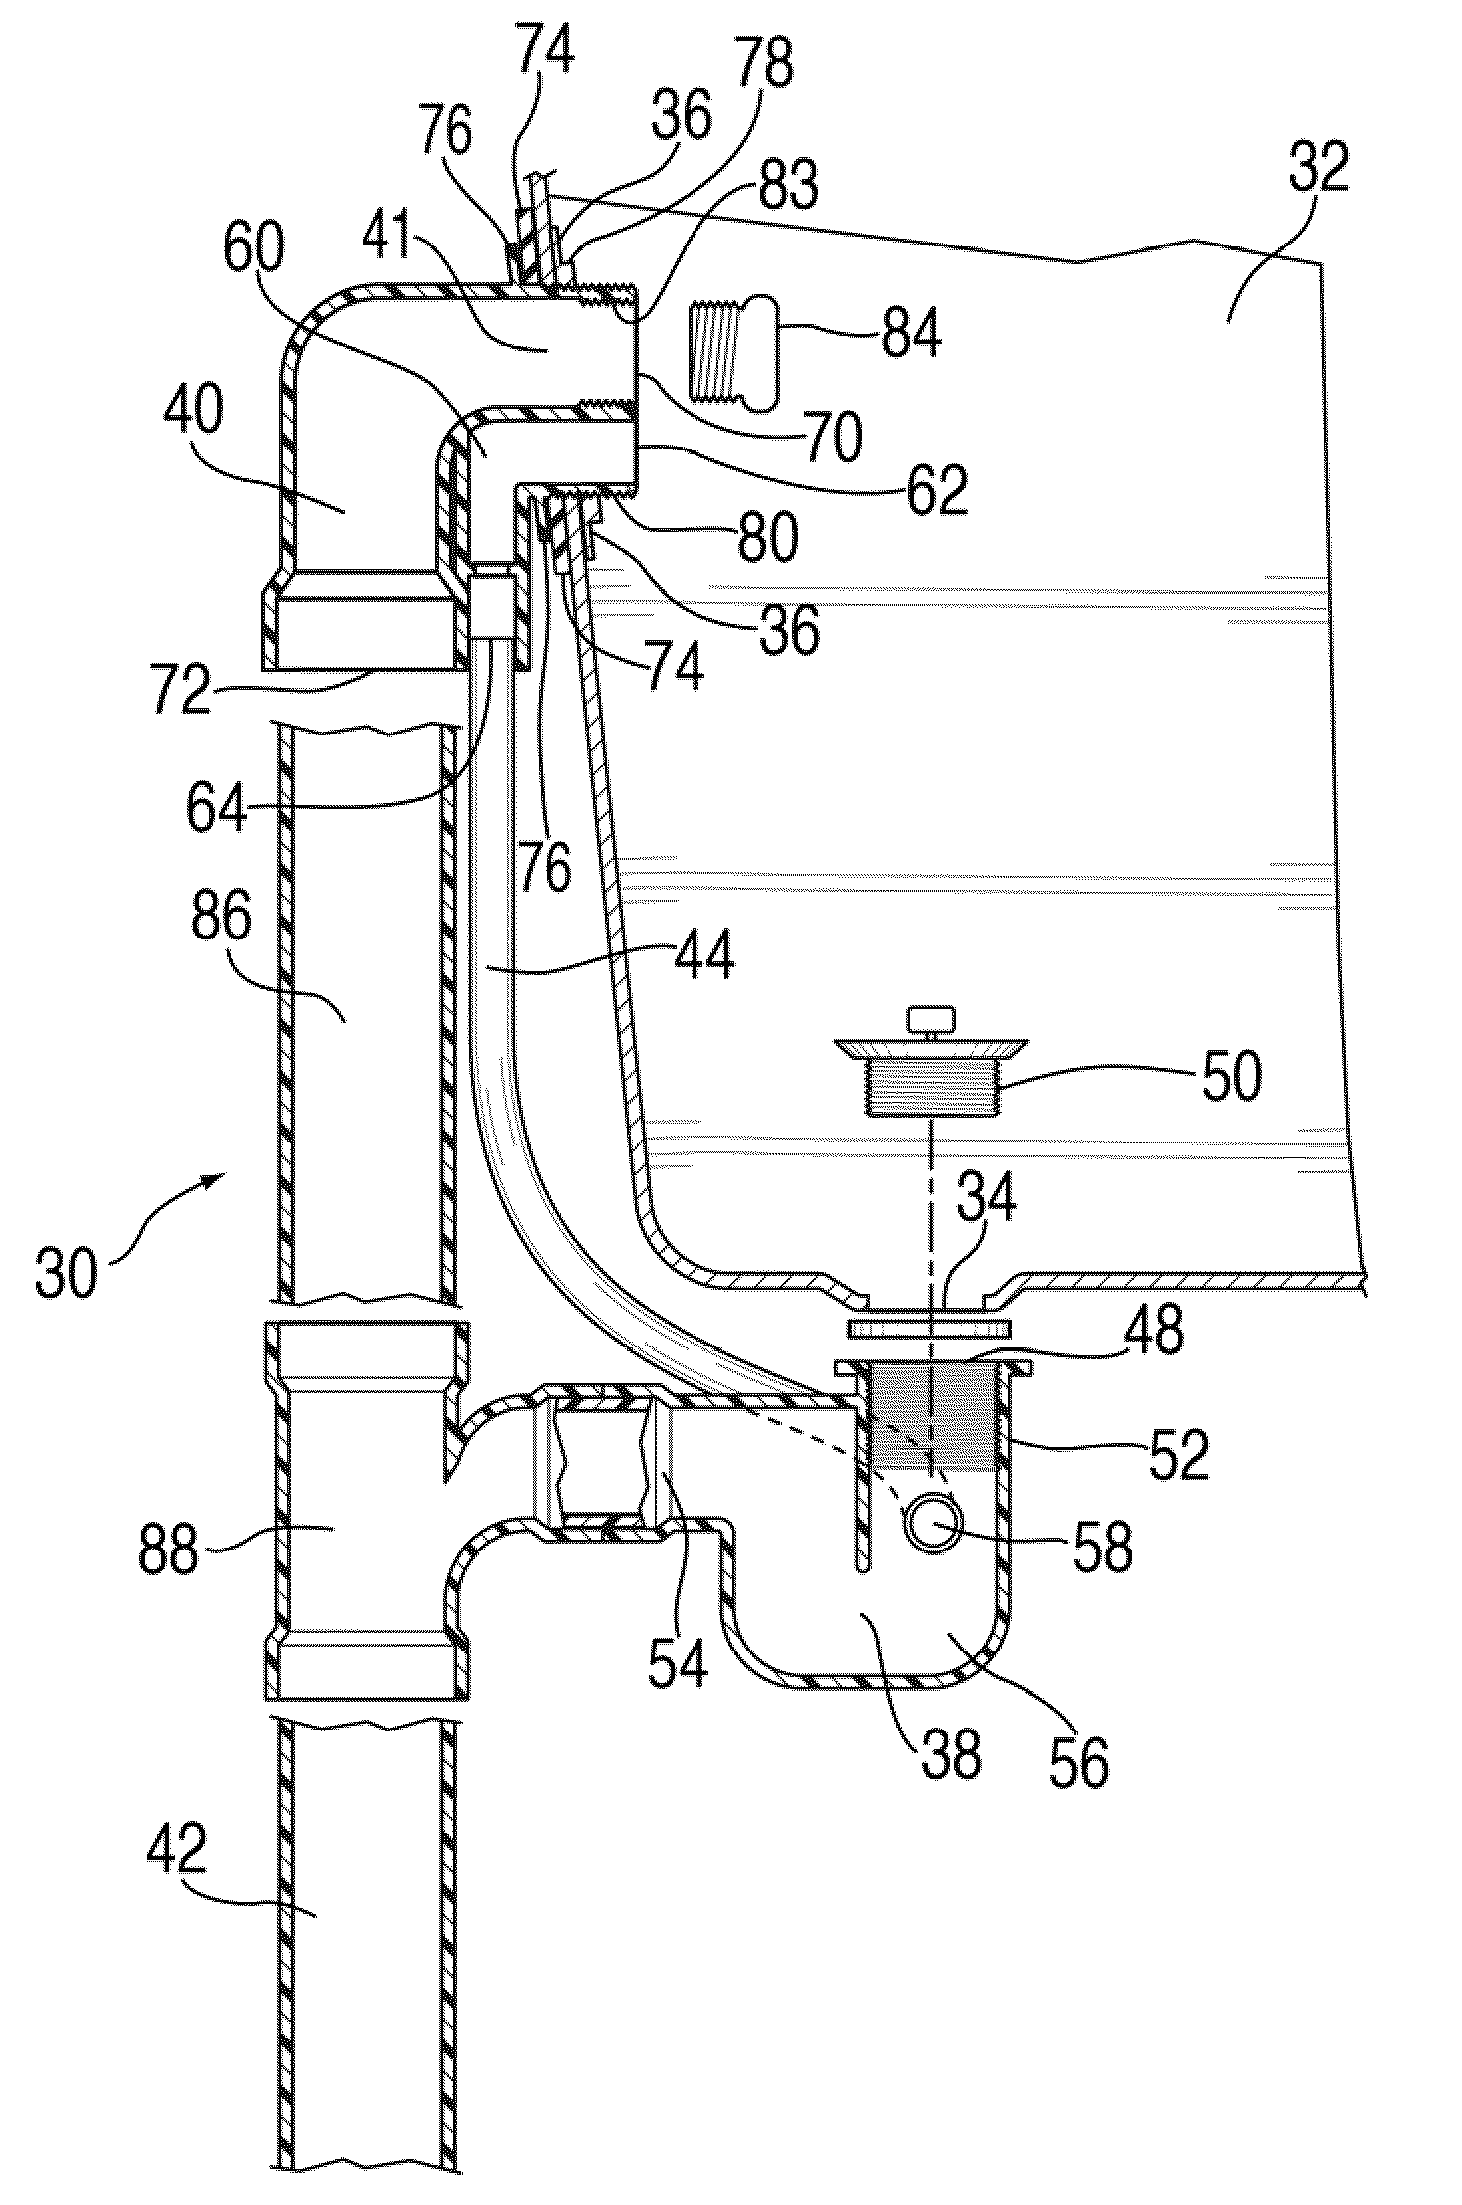 Tub drain and overflow assembly